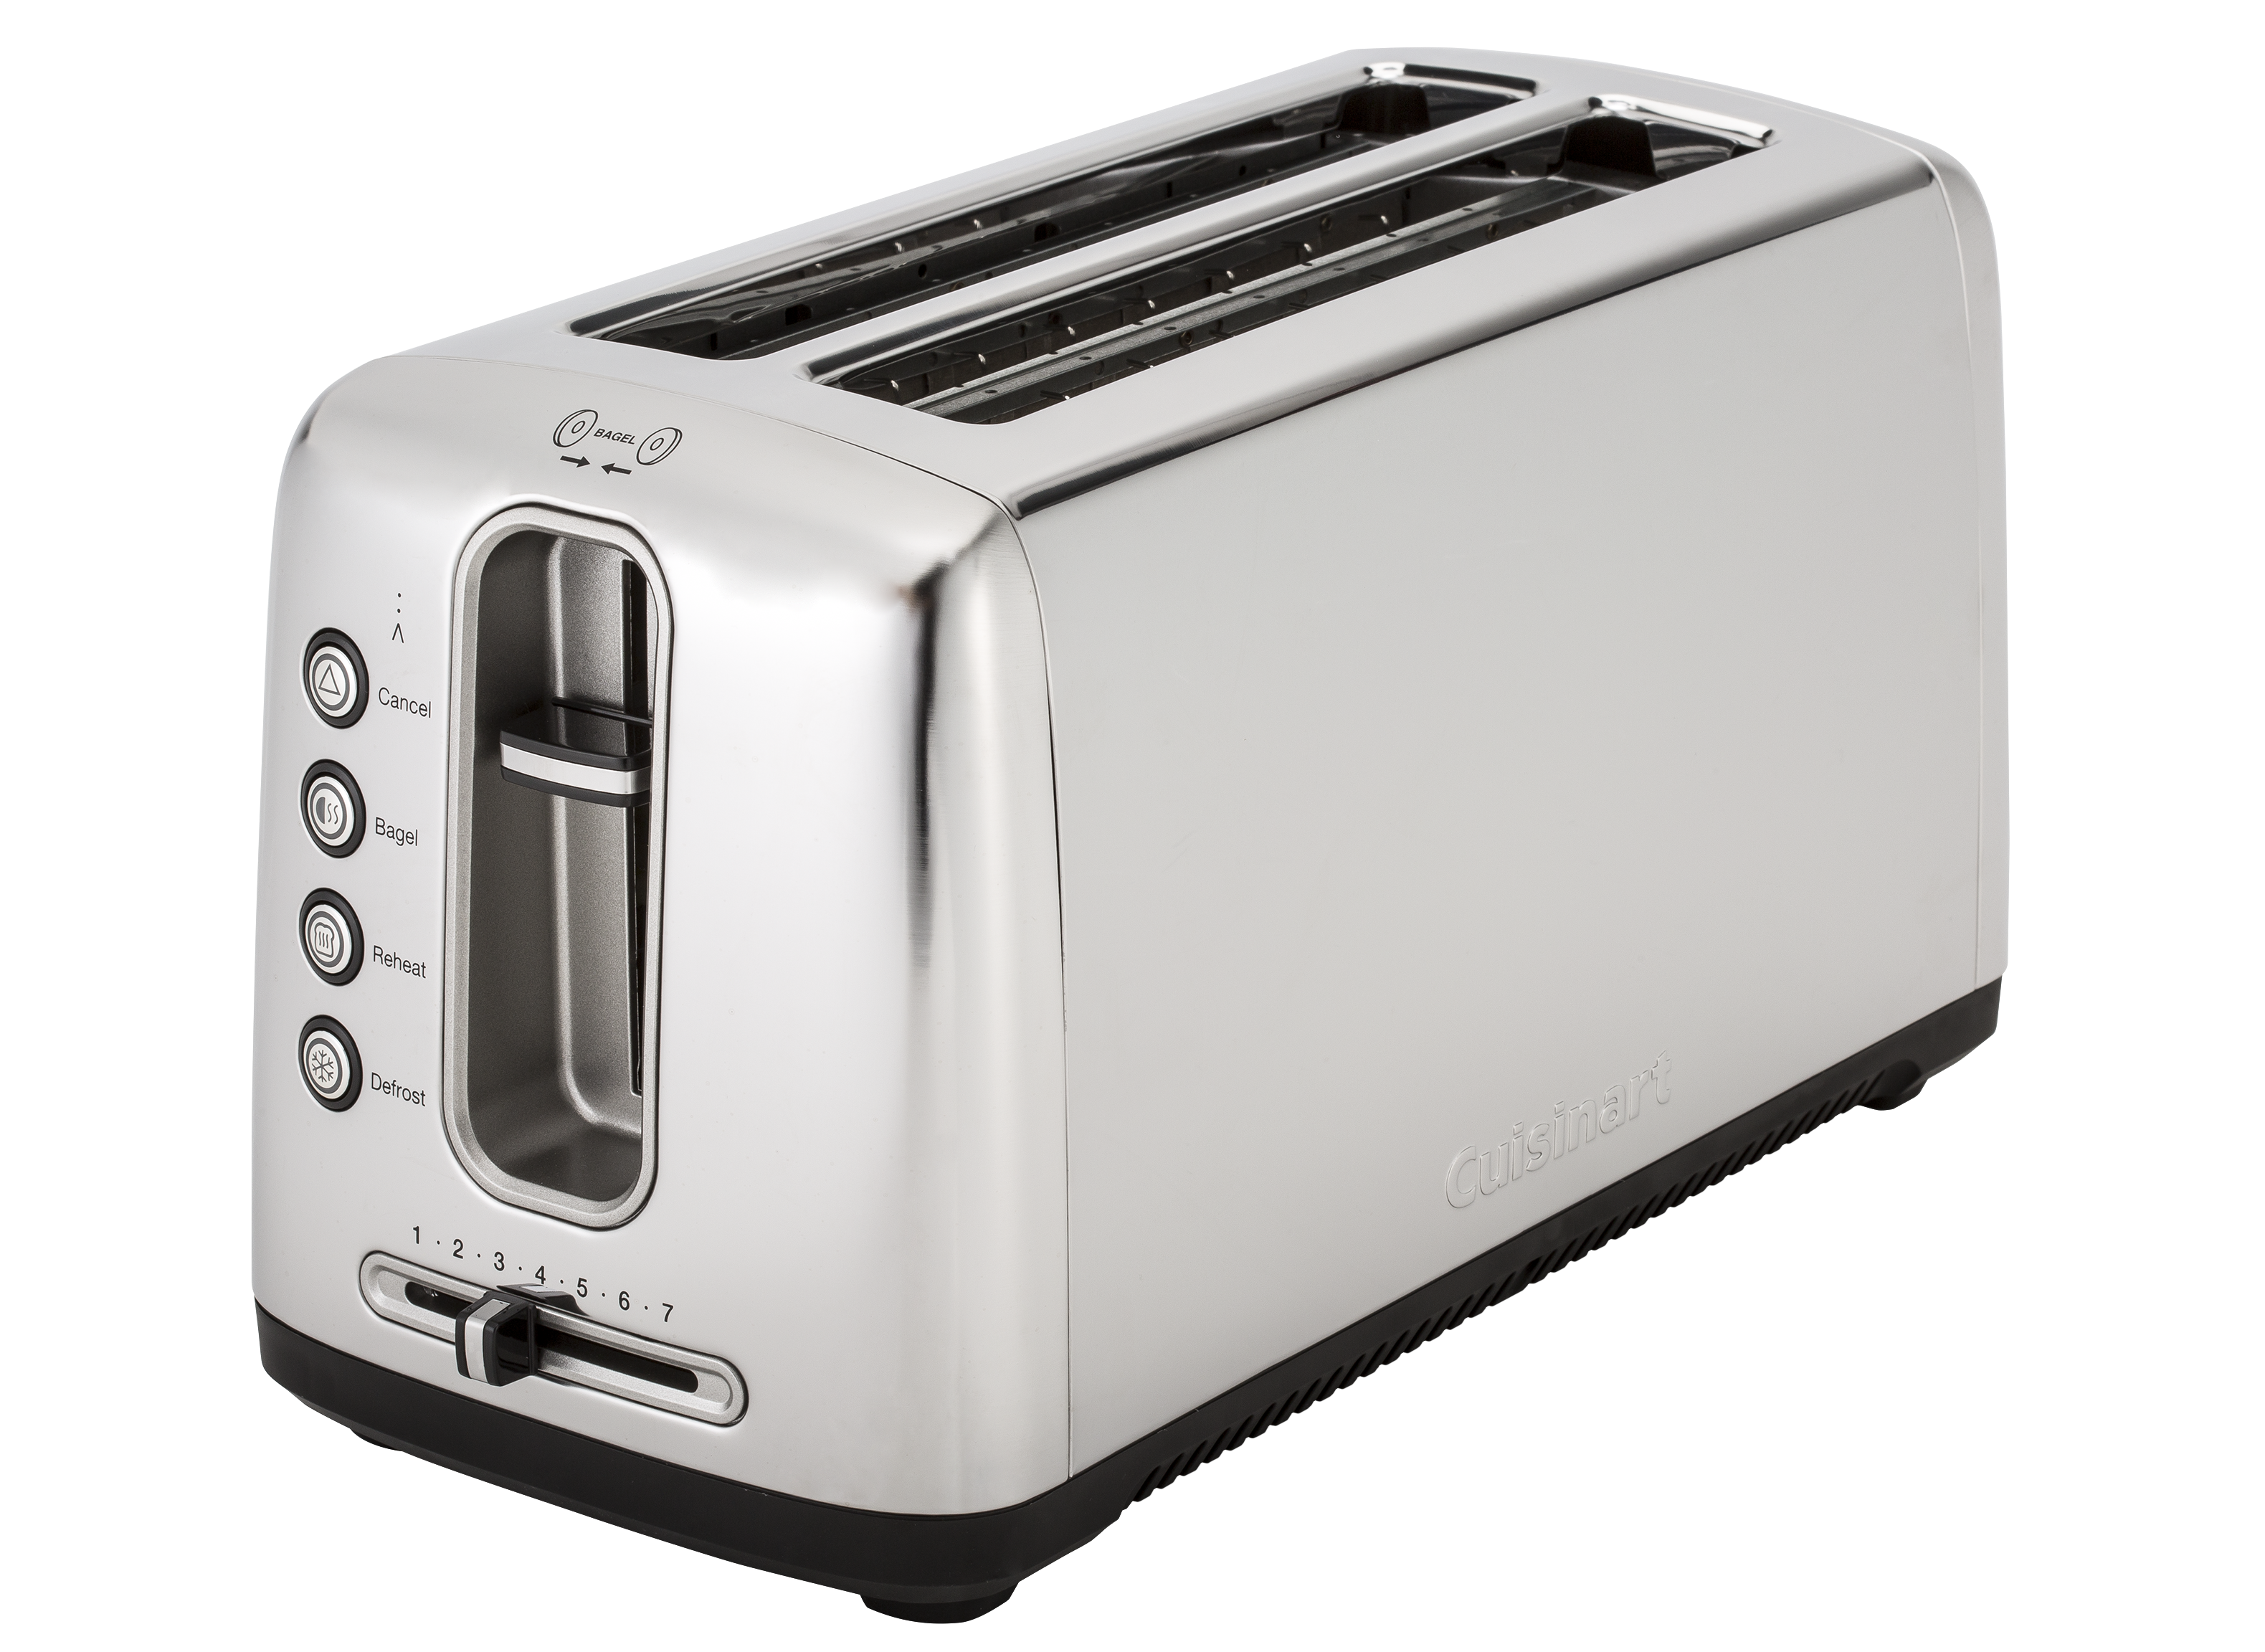 https://crdms.images.consumerreports.org/prod/products/cr/models/389609-toasters-cuisinart-thebakeryscpt2400.png